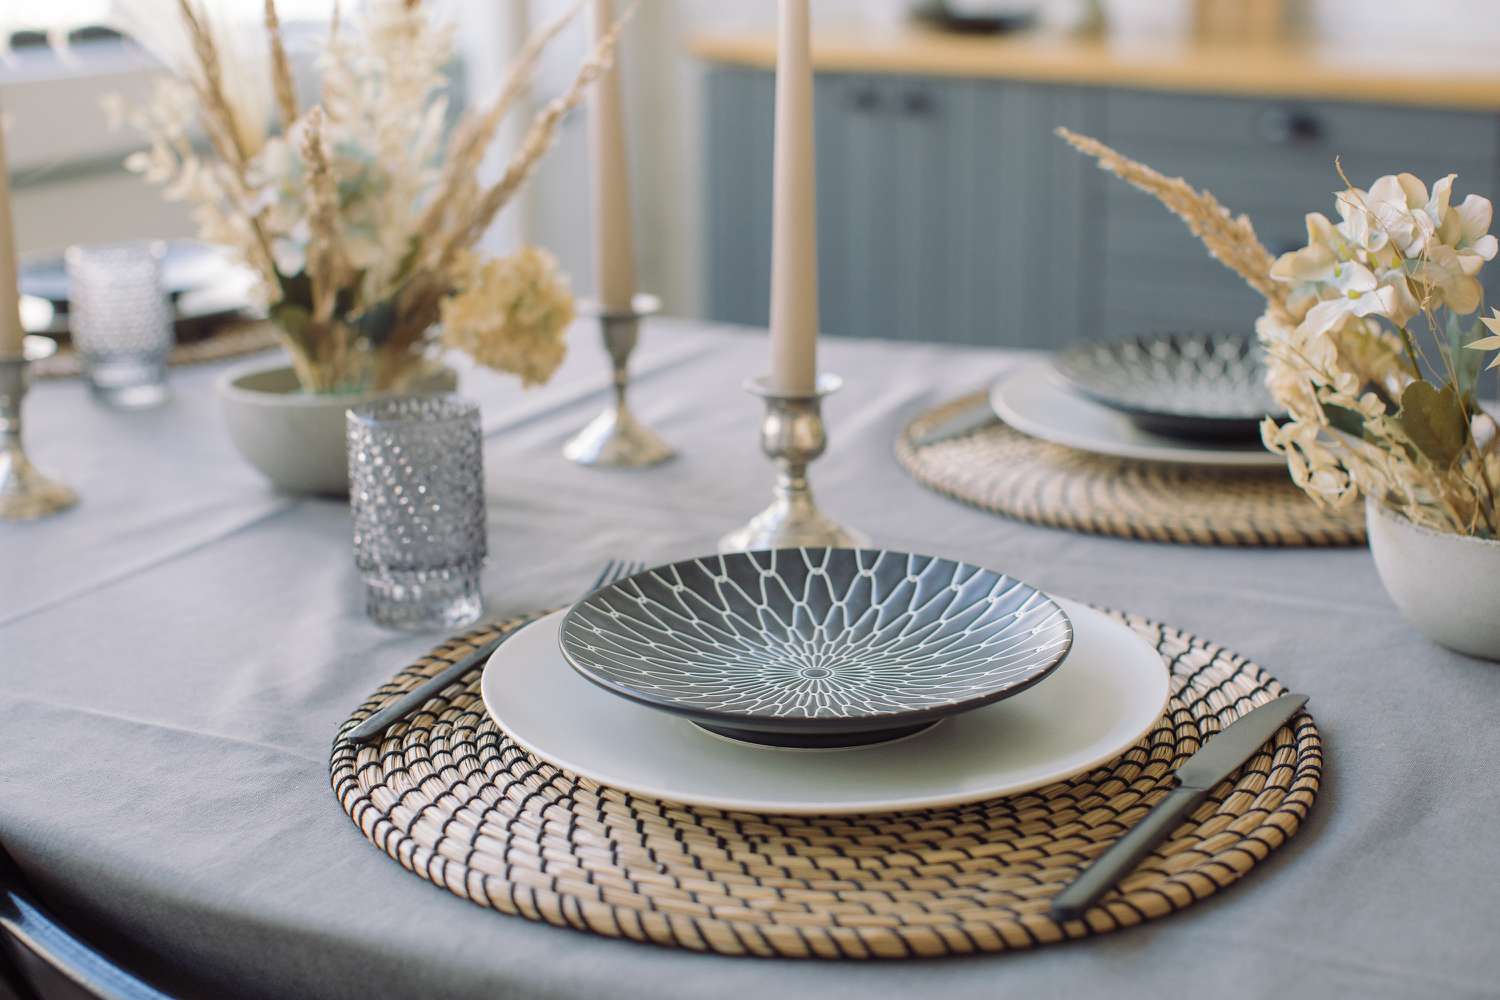 How To Set Plates On Dining Table